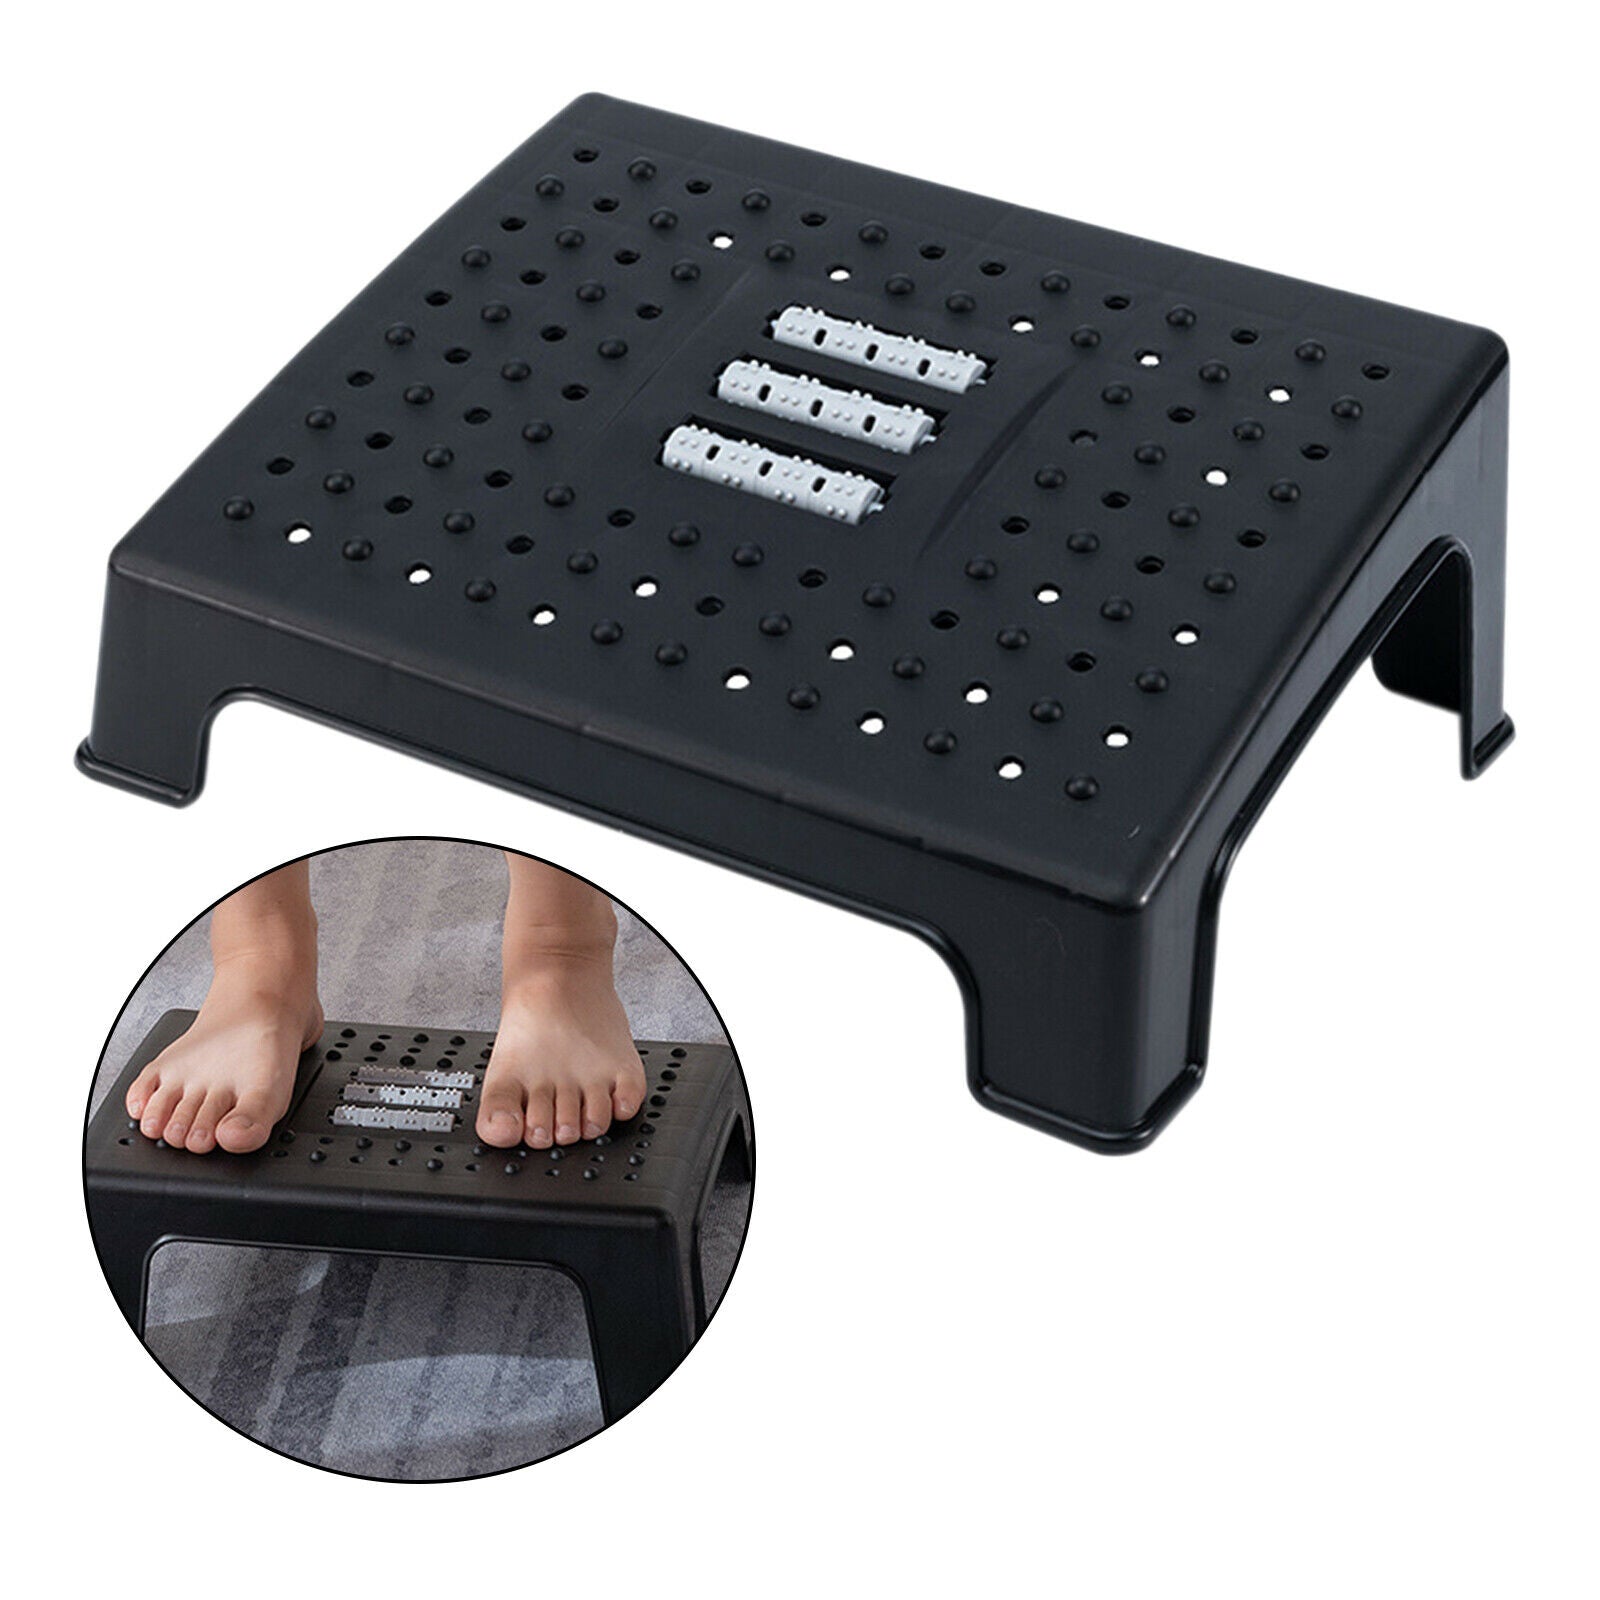 The footrest under the desk improves posture and circulation of the